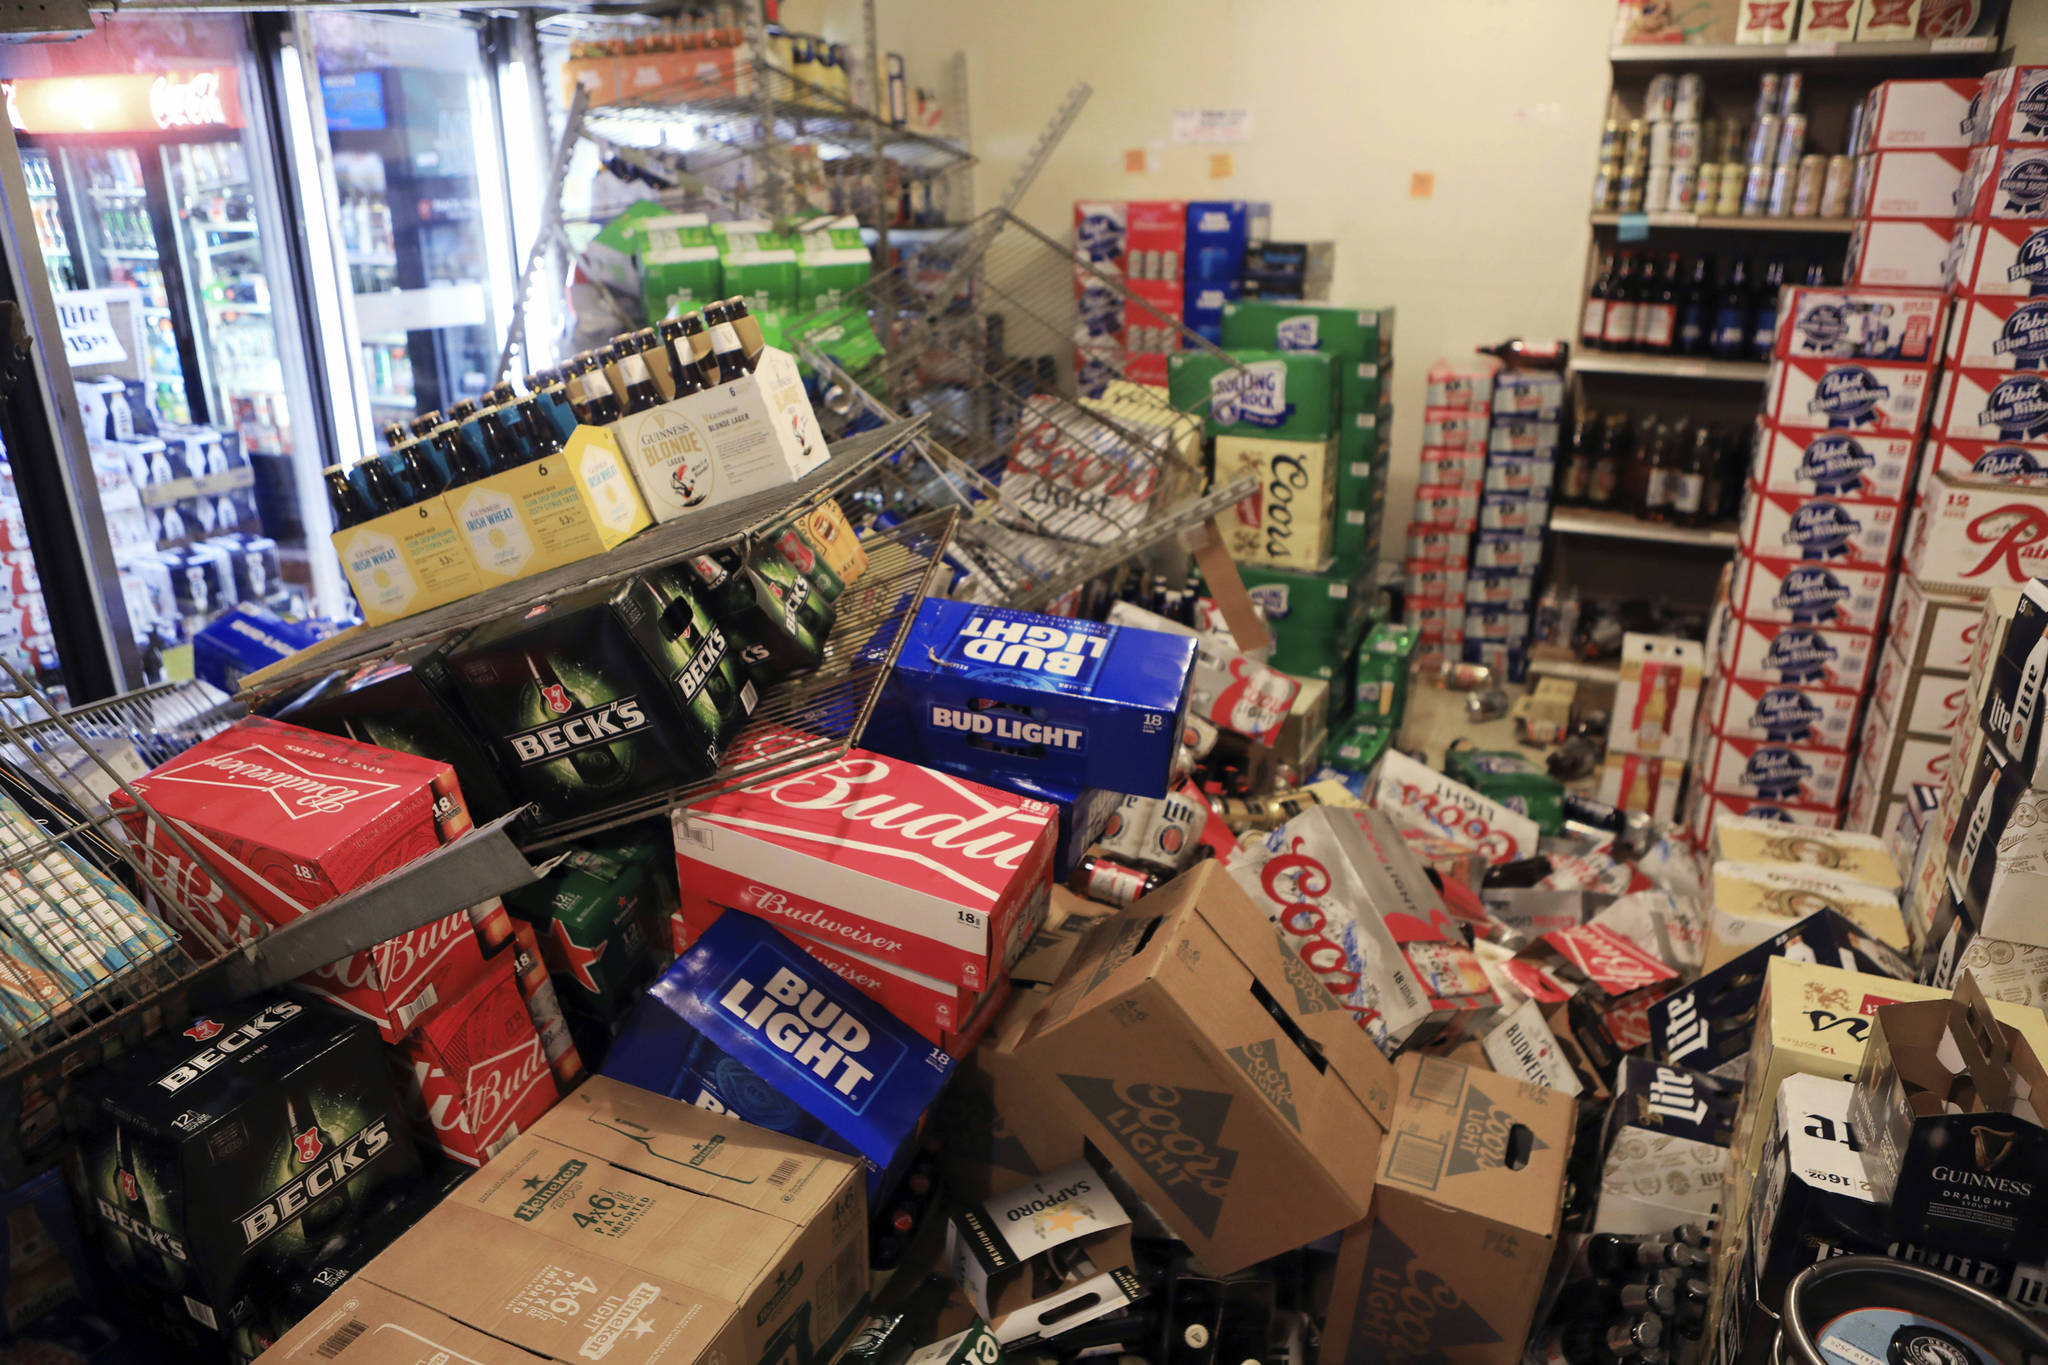 This Nov. 30, 2018 file photo shows cases of beer jumbled in a walk-in cooler at Value Liquor after an earthquake in Anchorage. (AP Photo/Dan Joling, File)